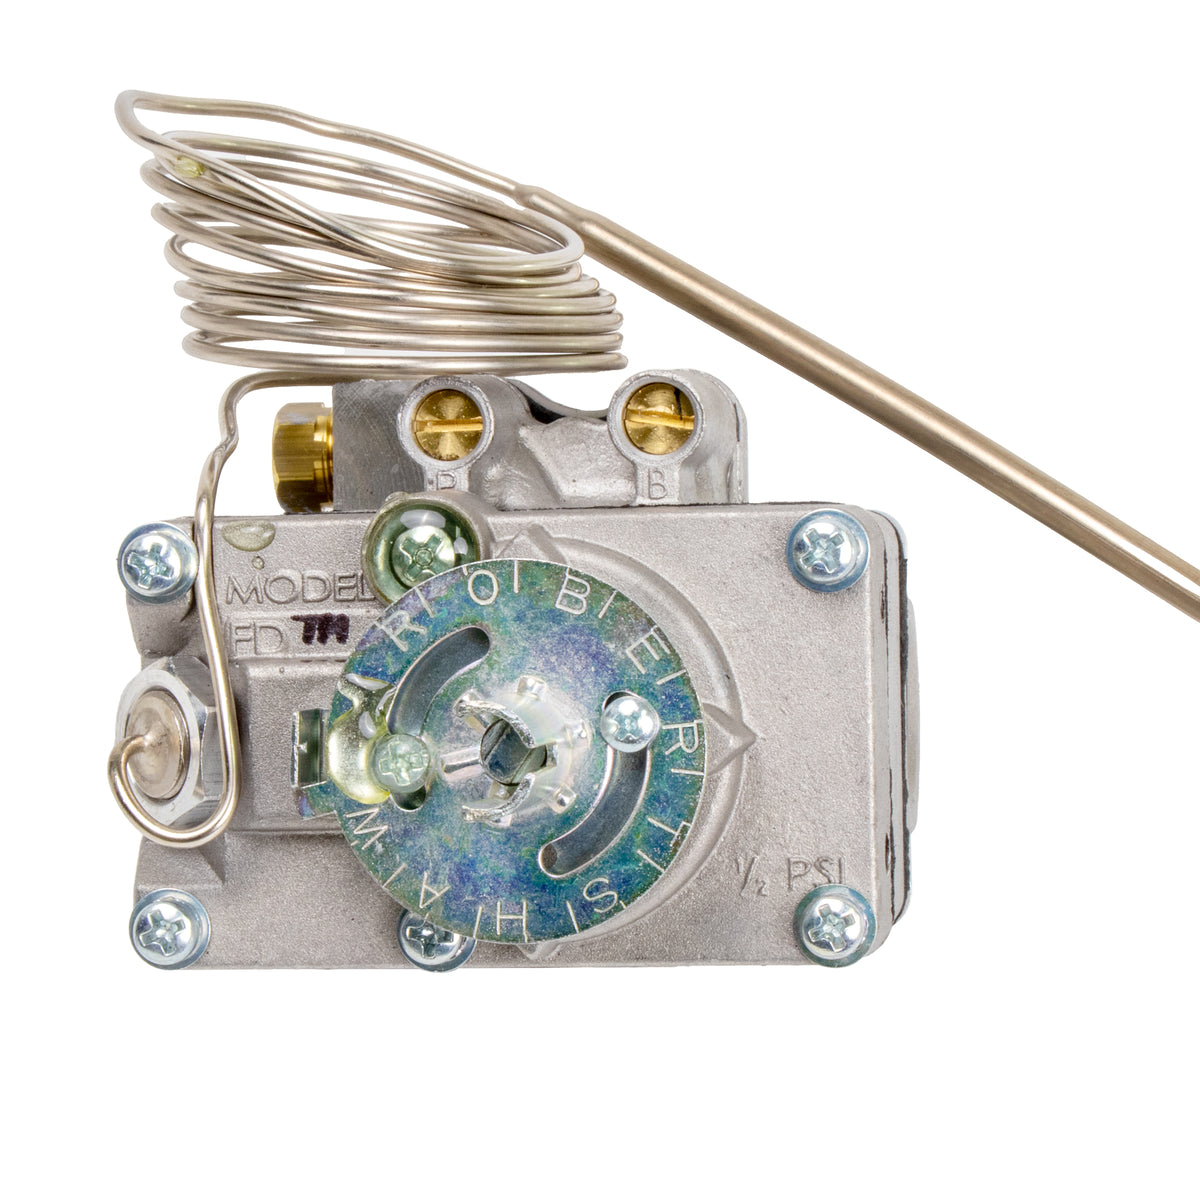 Market Forge 10-4714 Oven Thermostat